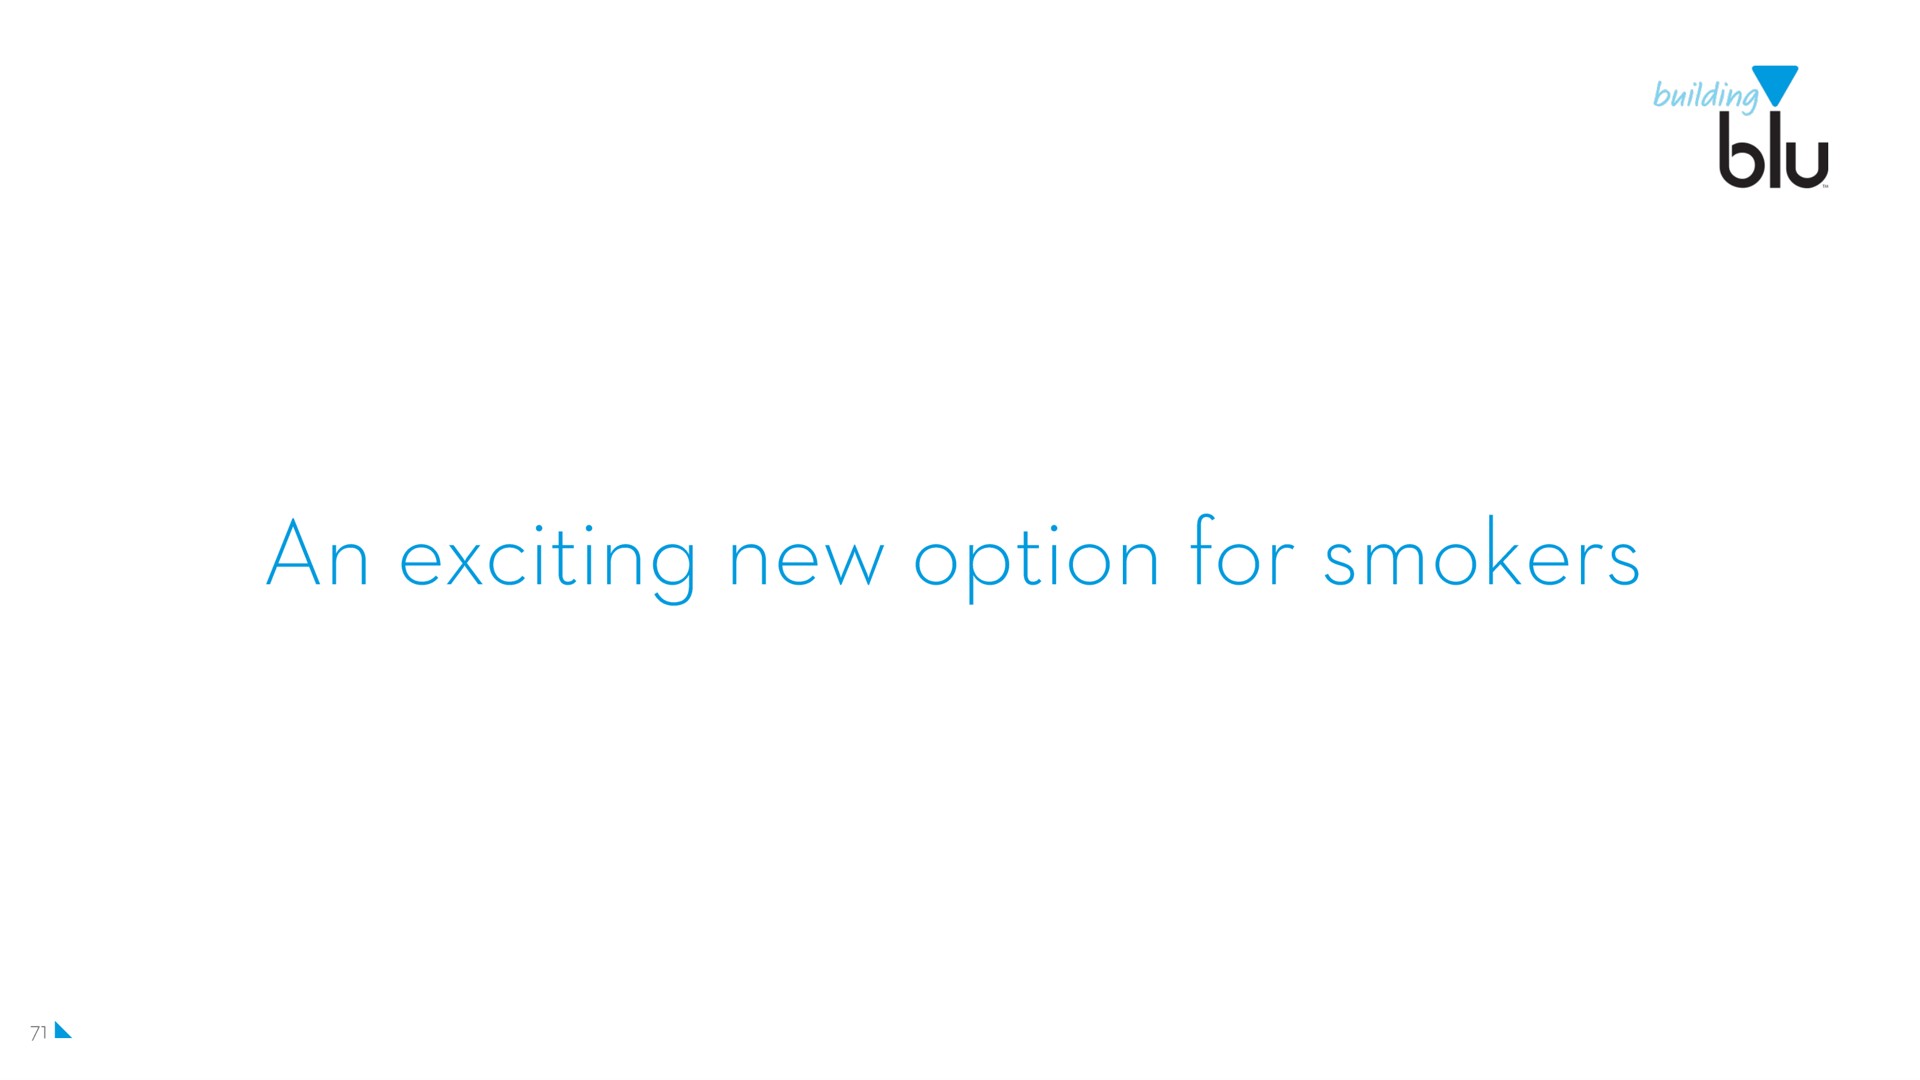 an exciting new option tor smokers | Imperial Brands